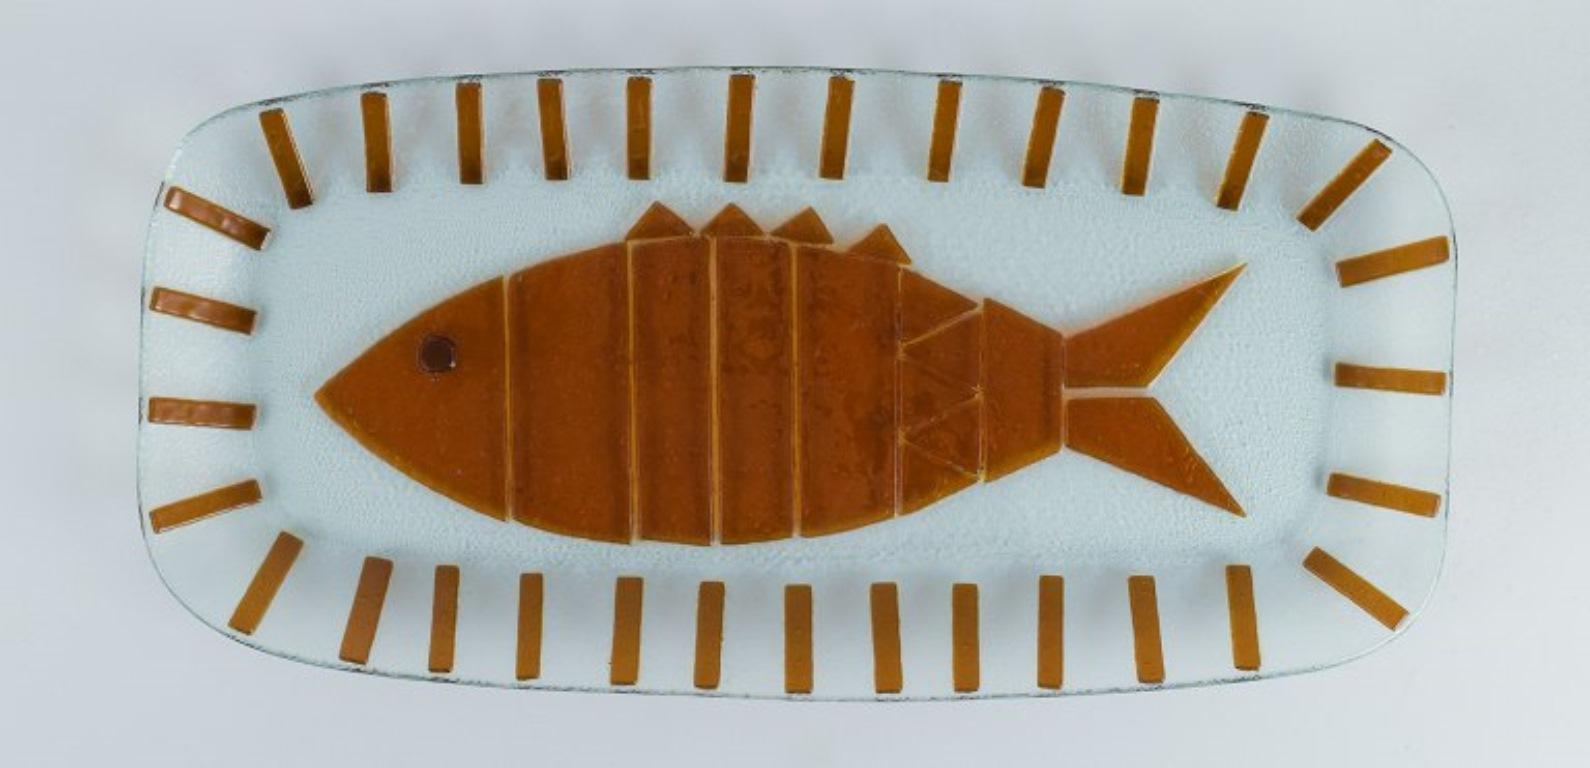 Murano, Italy. Large art glass dish in a modern style with a fish motif.
Approx. 1960s.
In perfect condition.
Dimensions: L 51.5 x W 24.5 x H 3.0 cm.